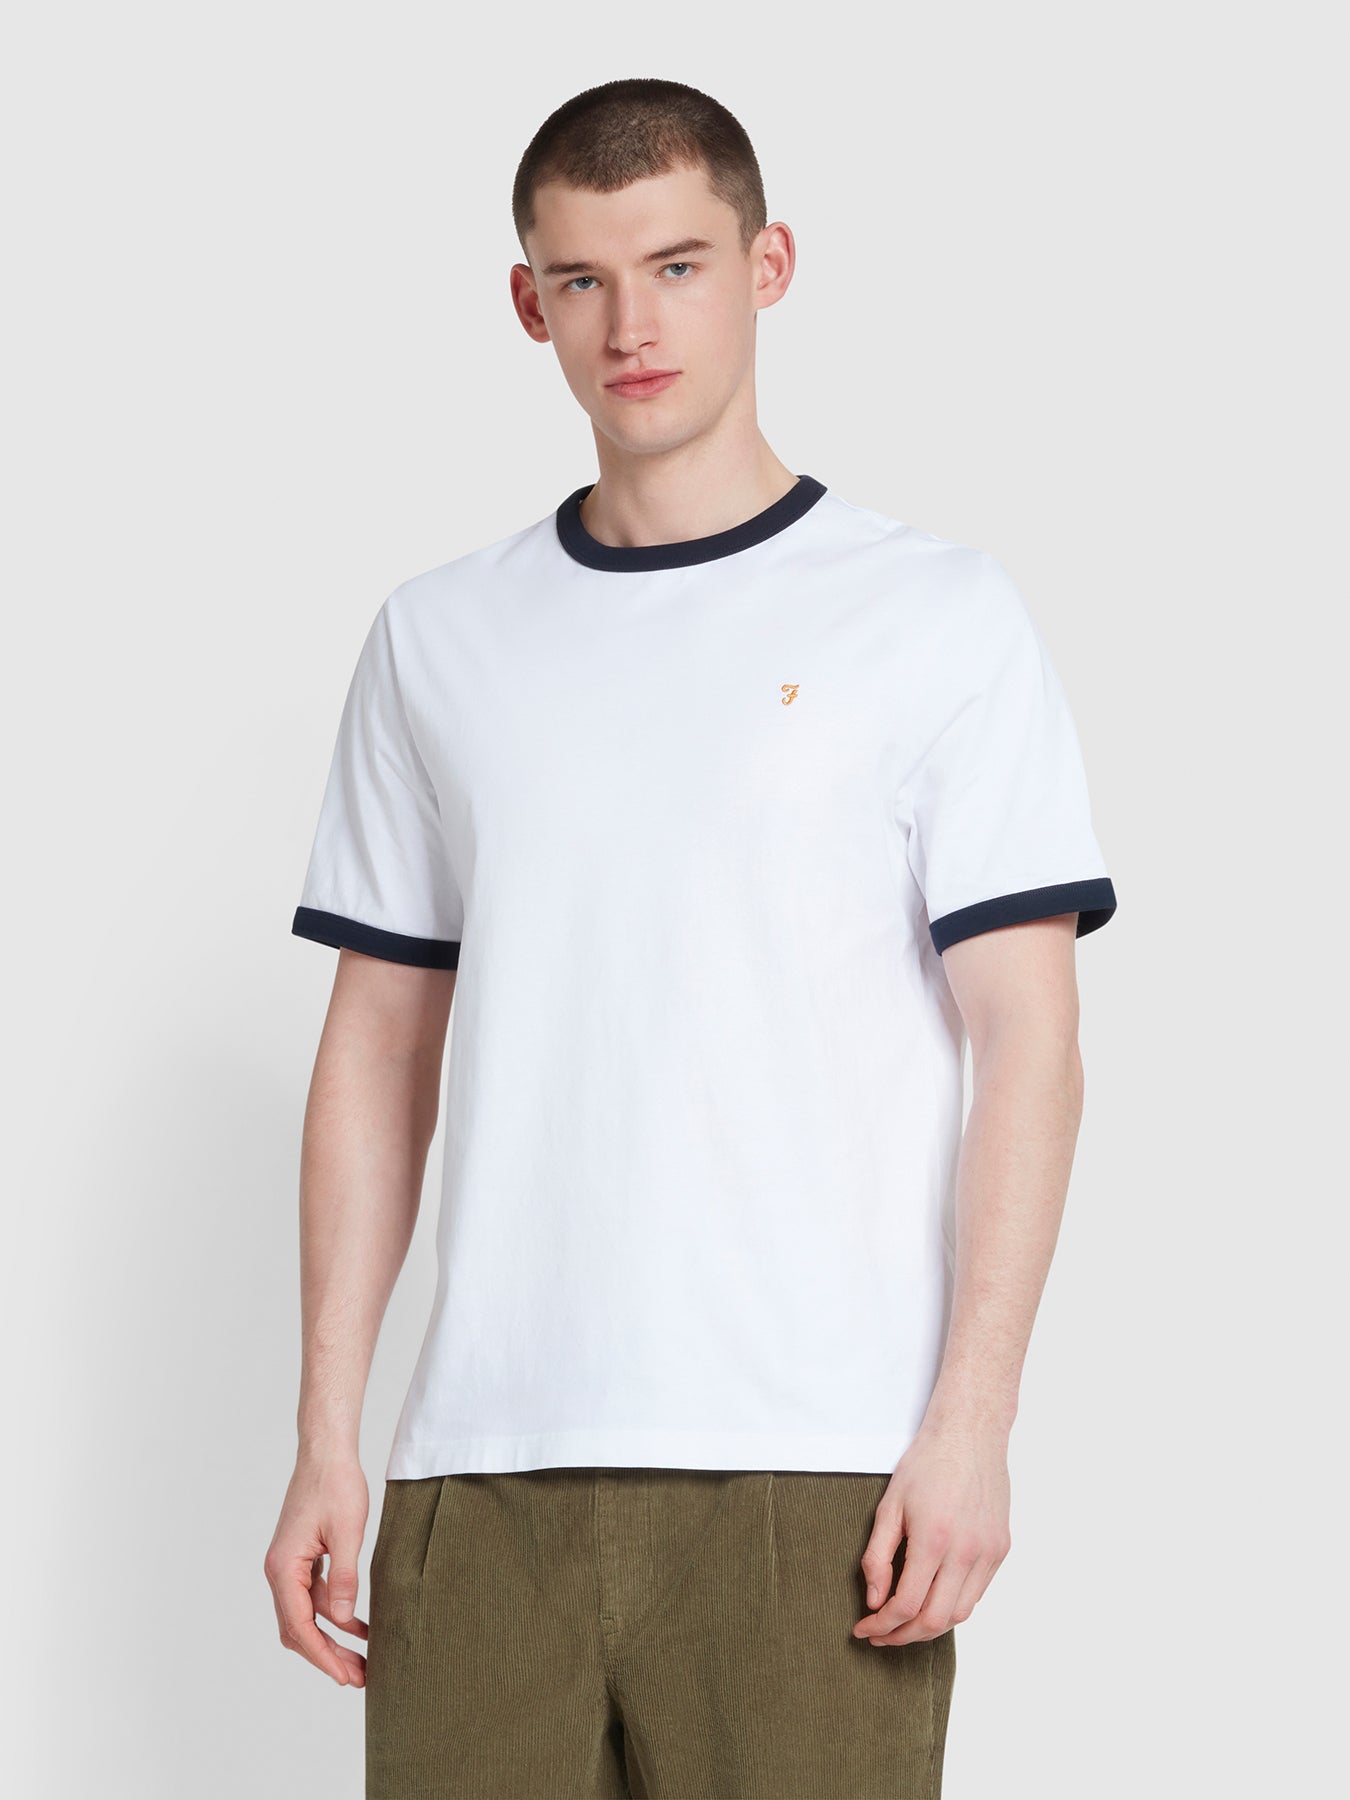 View Groves Regular Fit TShirt In White information